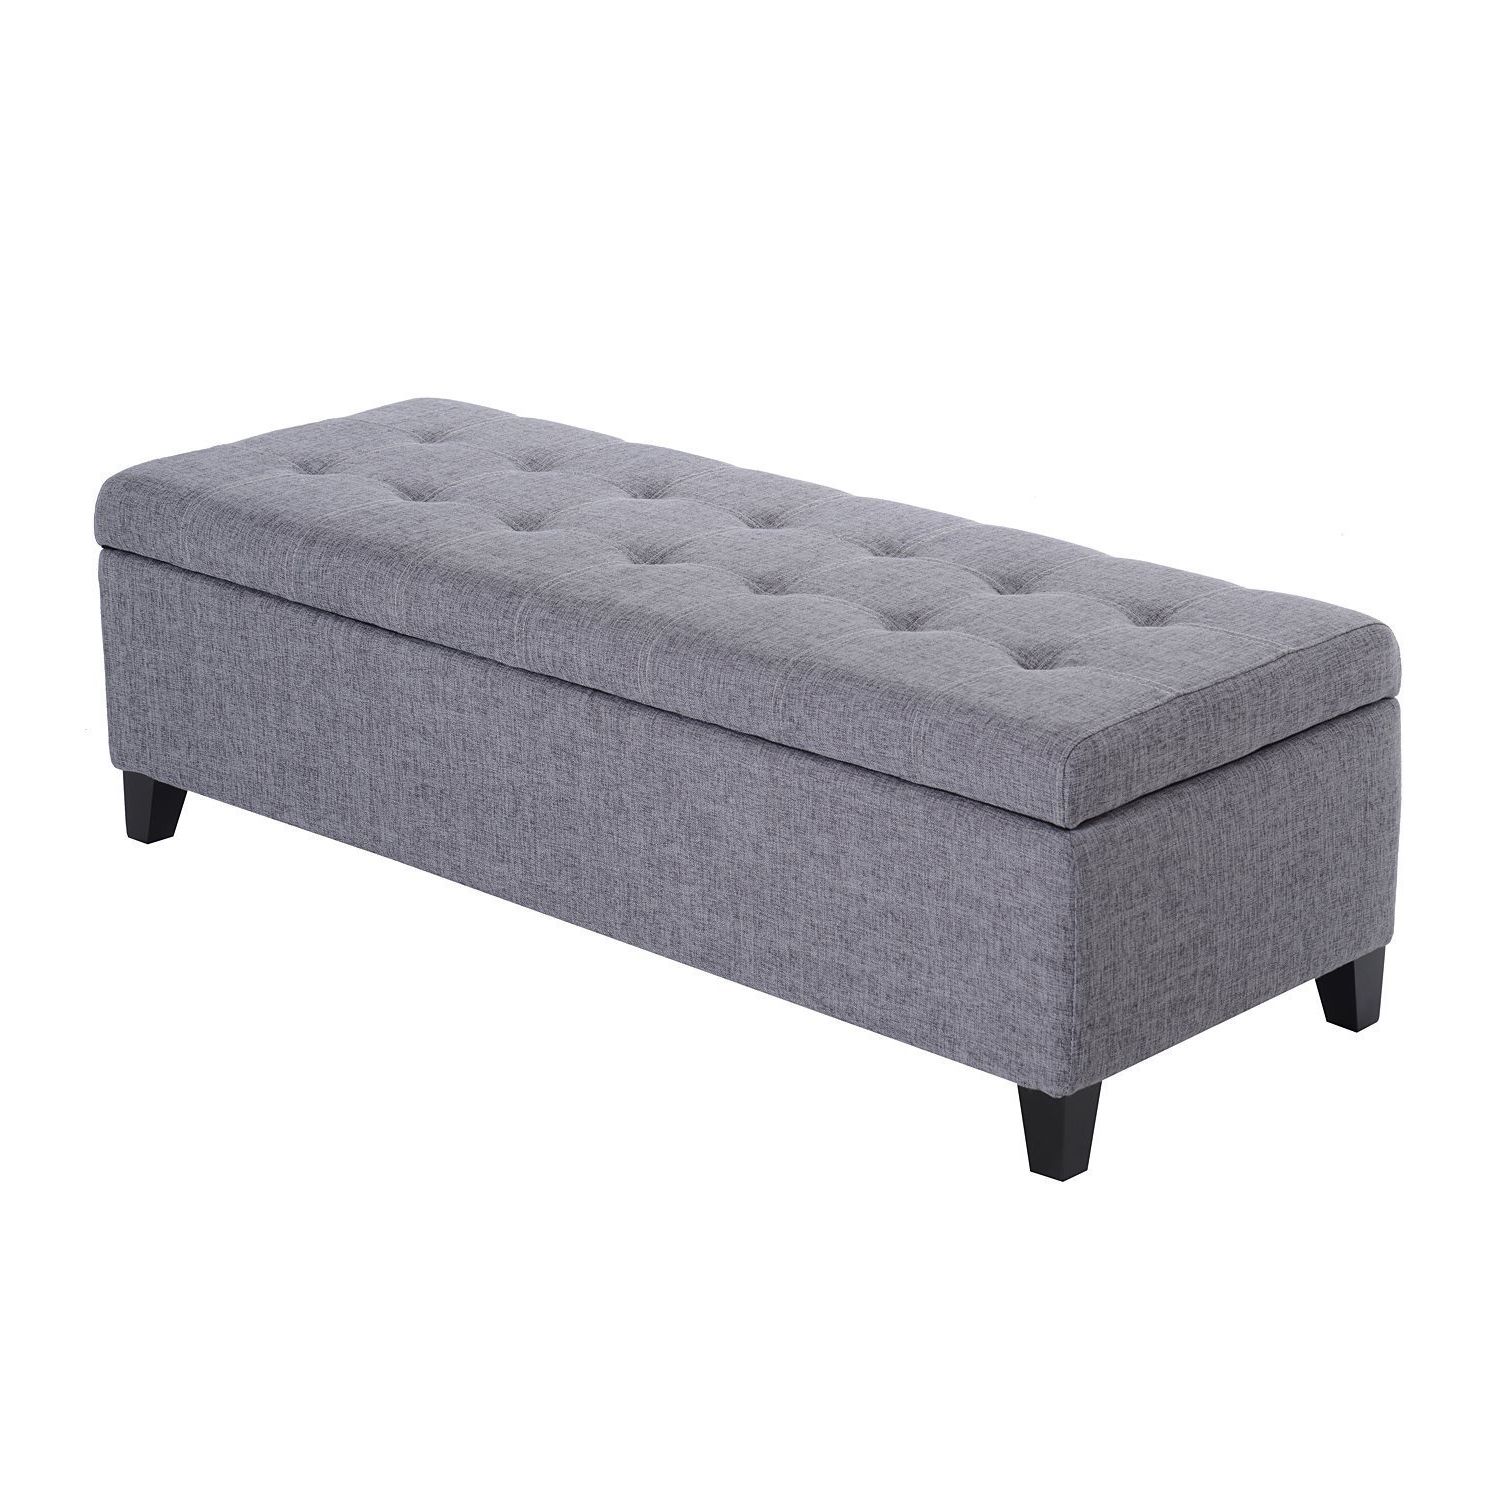 Famous Fabric Storage Ottomans With Regard To Homcom 51" Large Tufted Linen Fabric Ottoman Storage Bench With Soft (View 2 of 10)